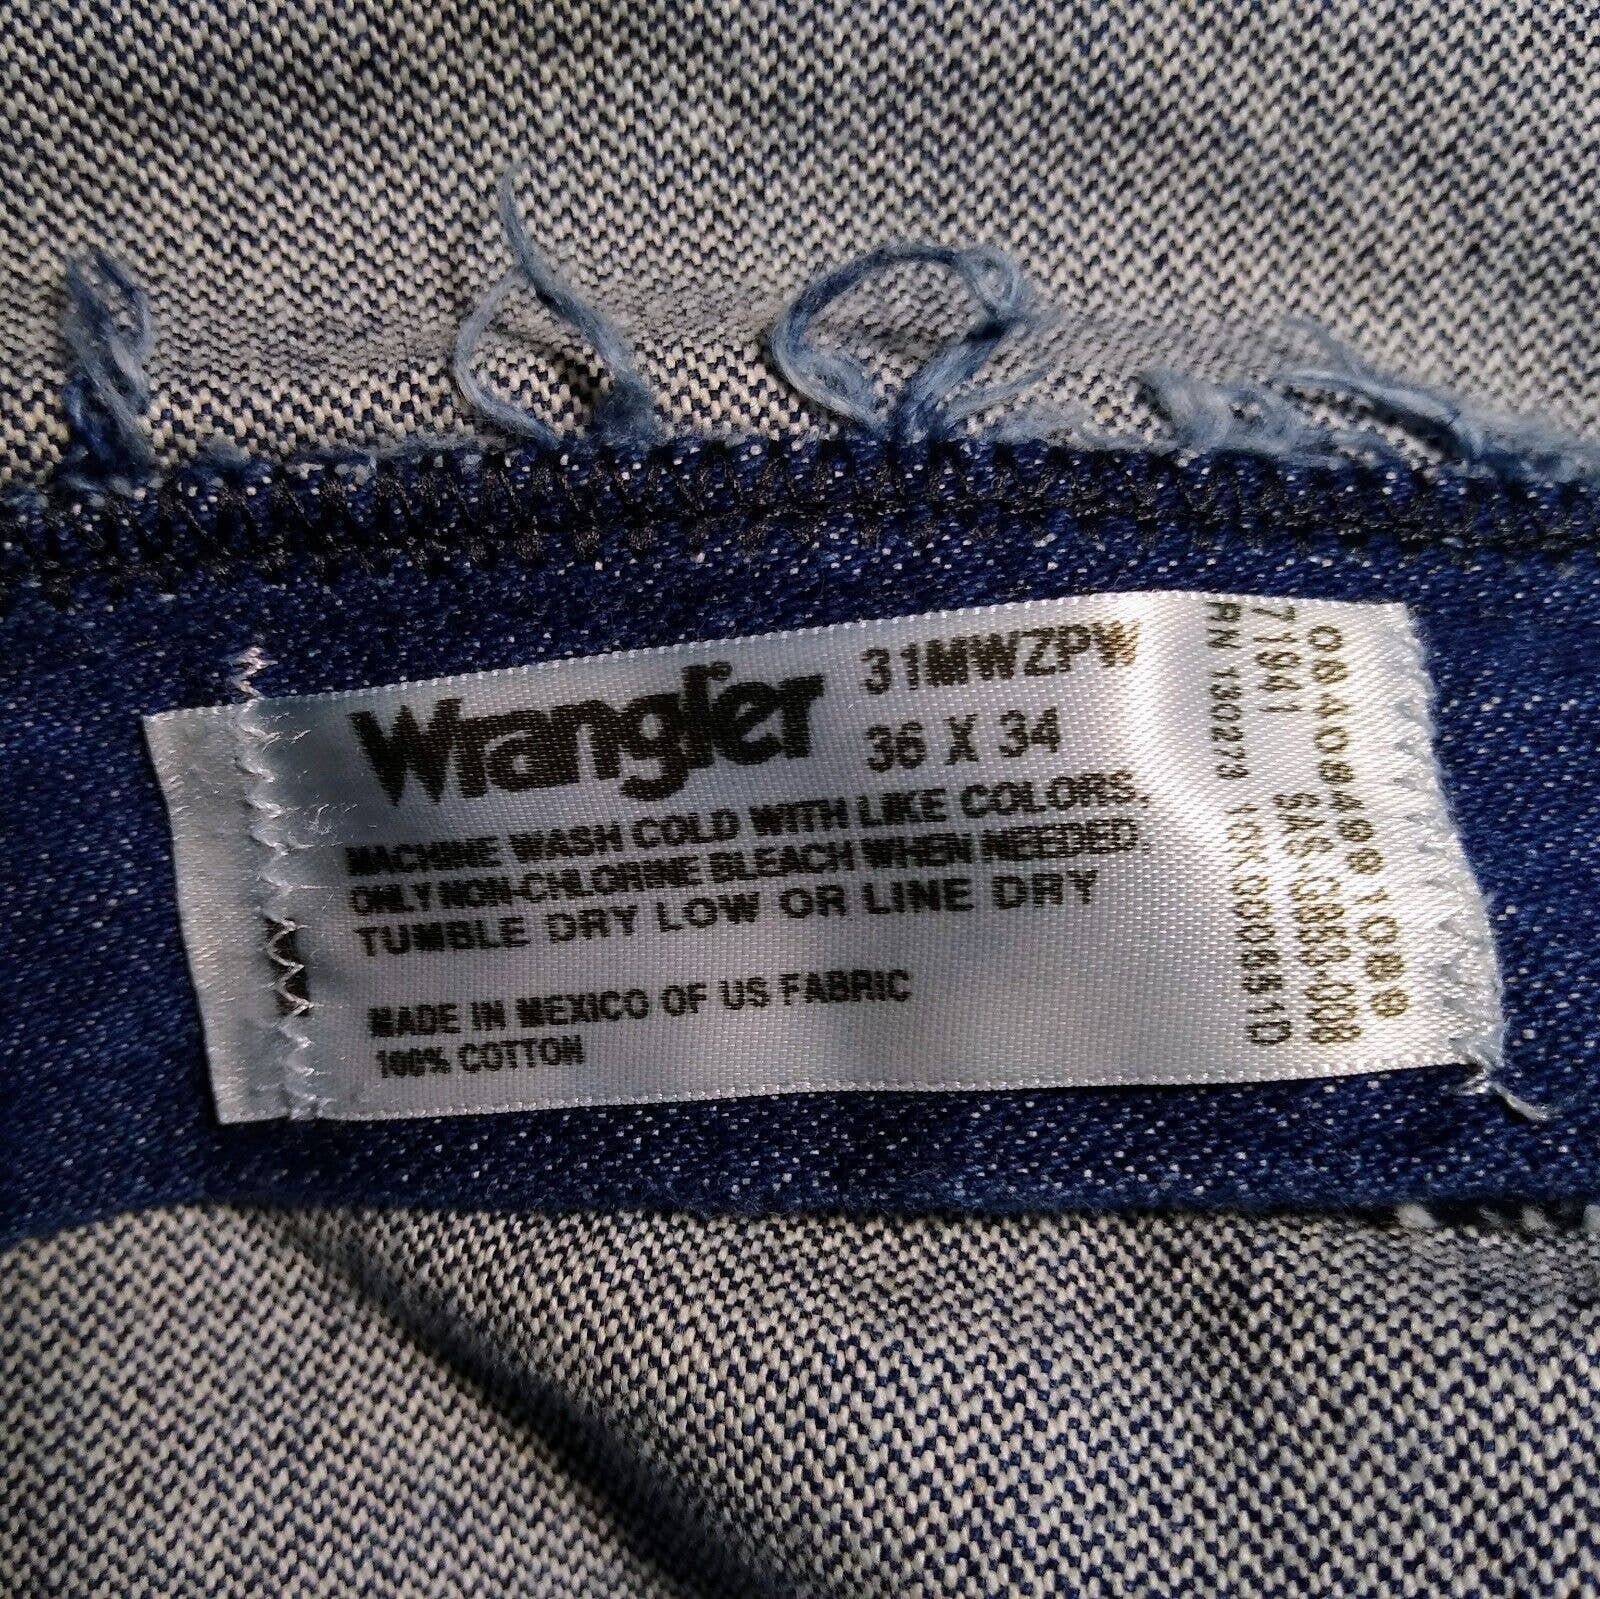 Wrangler 31MWZPW Men's Cowboy Cut Relaxed Fit 100% Cotton - Etsy